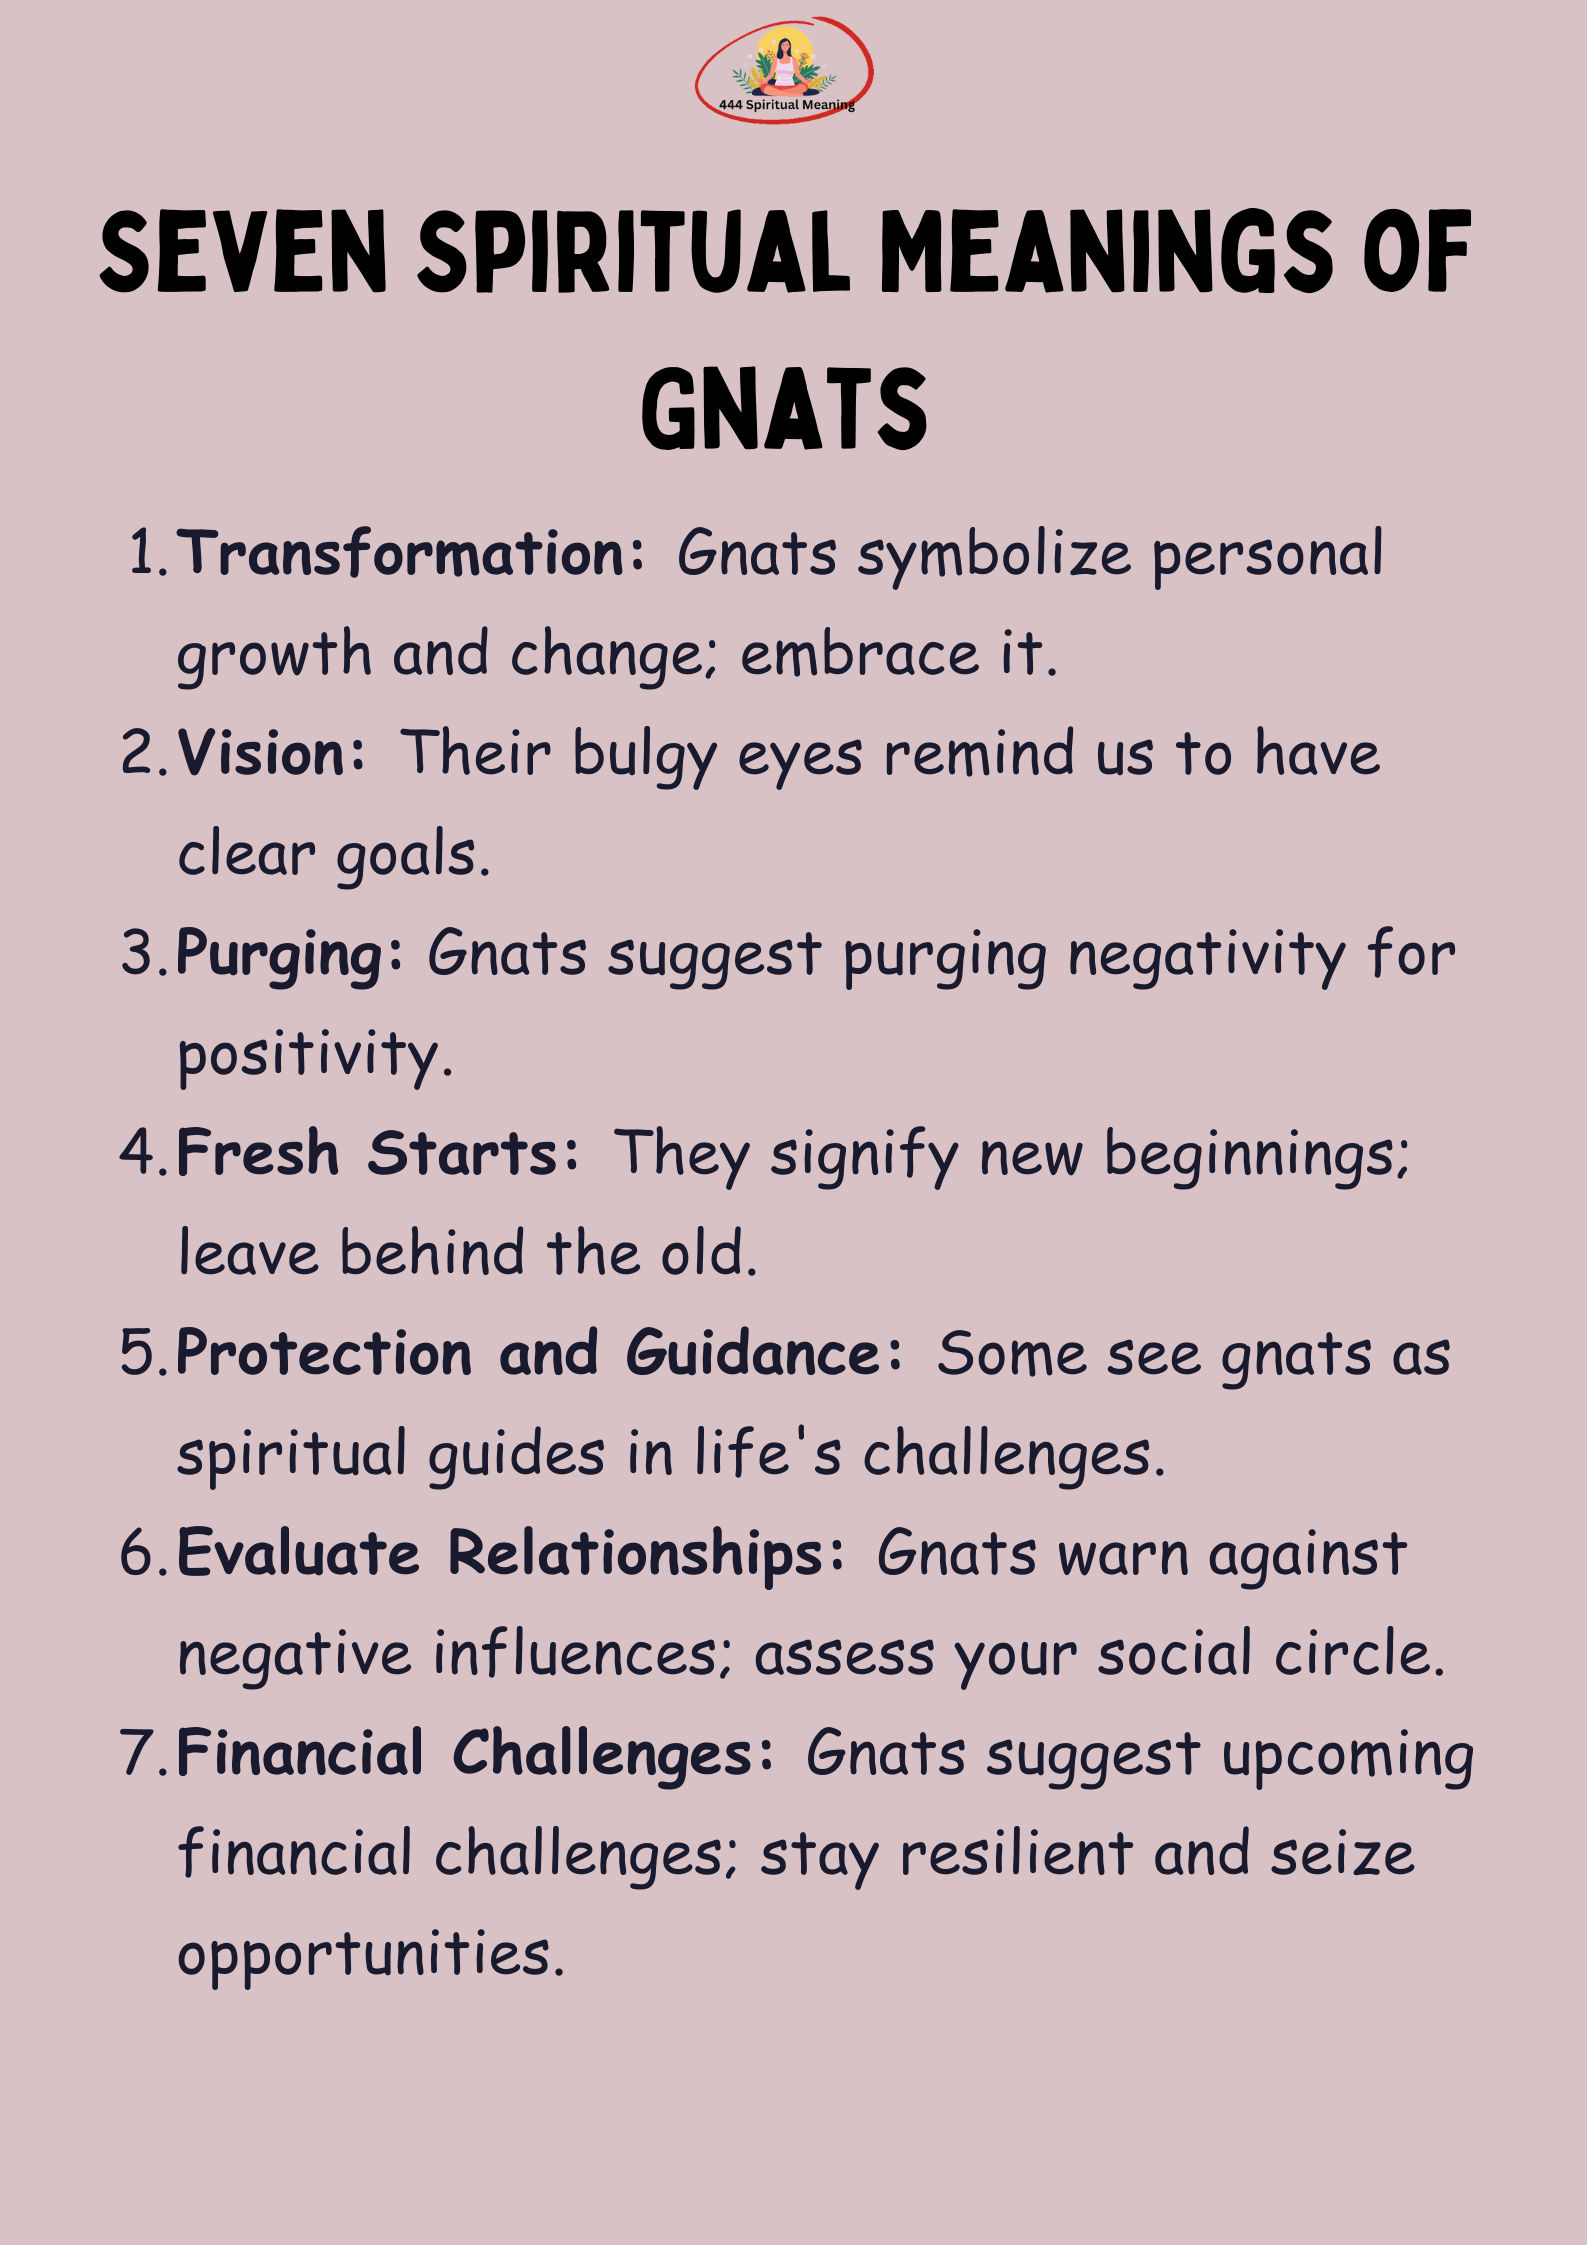 Seven Spiritual Meanings of Gnats